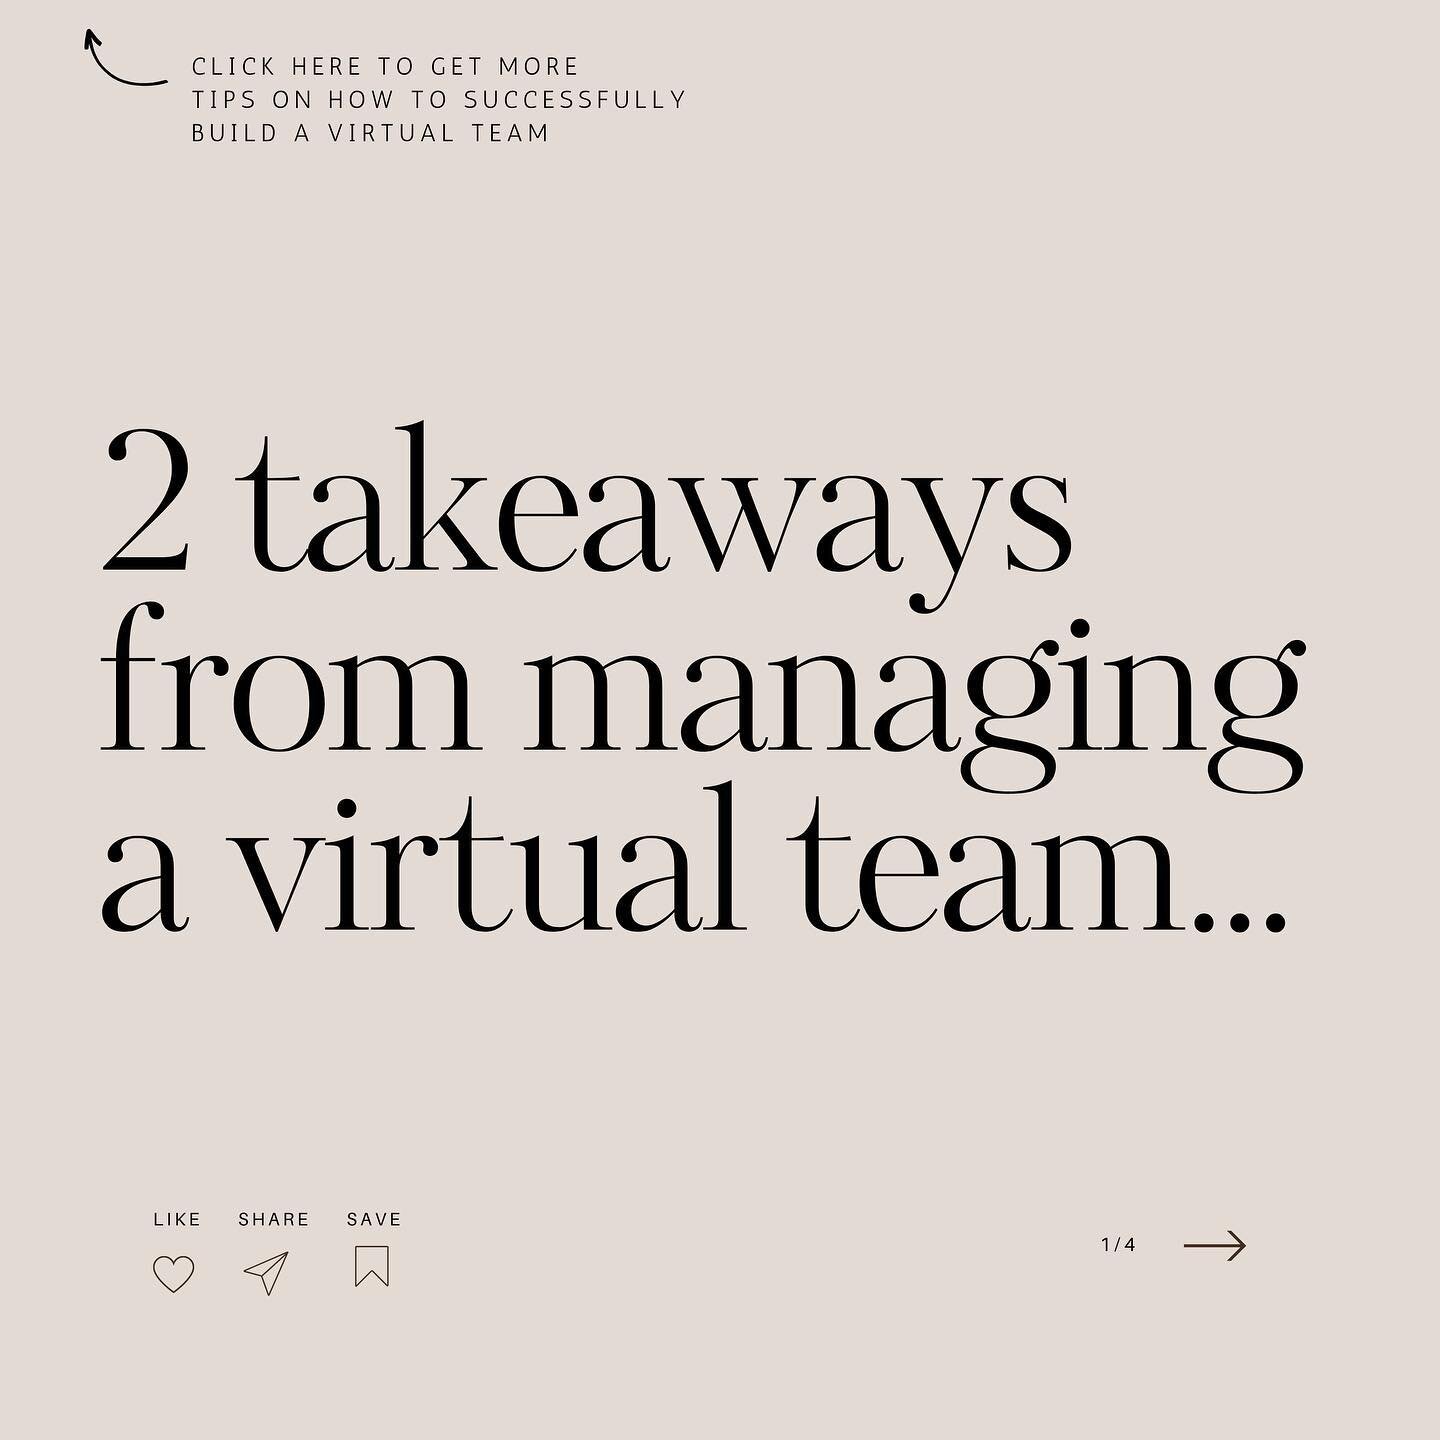 2 takeaways from managing a virtual team 🫶🏻👀

Takeaway 1 -Embrace Imperfections 

Mistakes and miscommunications are inevitable in any collaboration. 

Striving for perfection is unrealistic, as each person brings unique perspectives. 

Foster emp